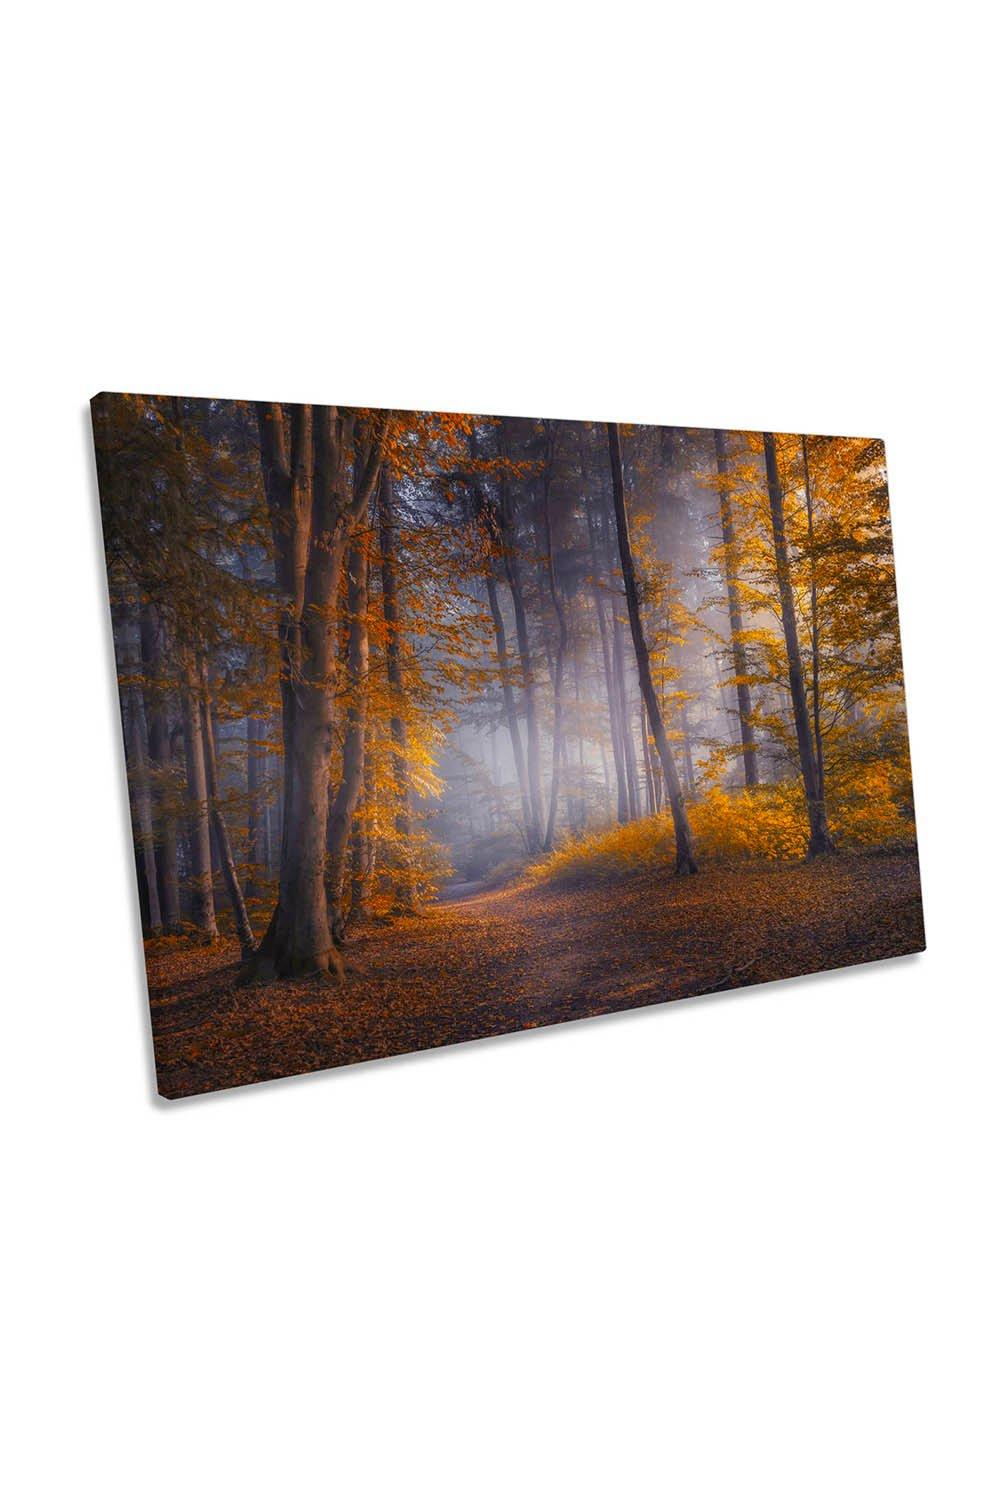 October Days Autumn Forest Canvas Wall Art Picture Print